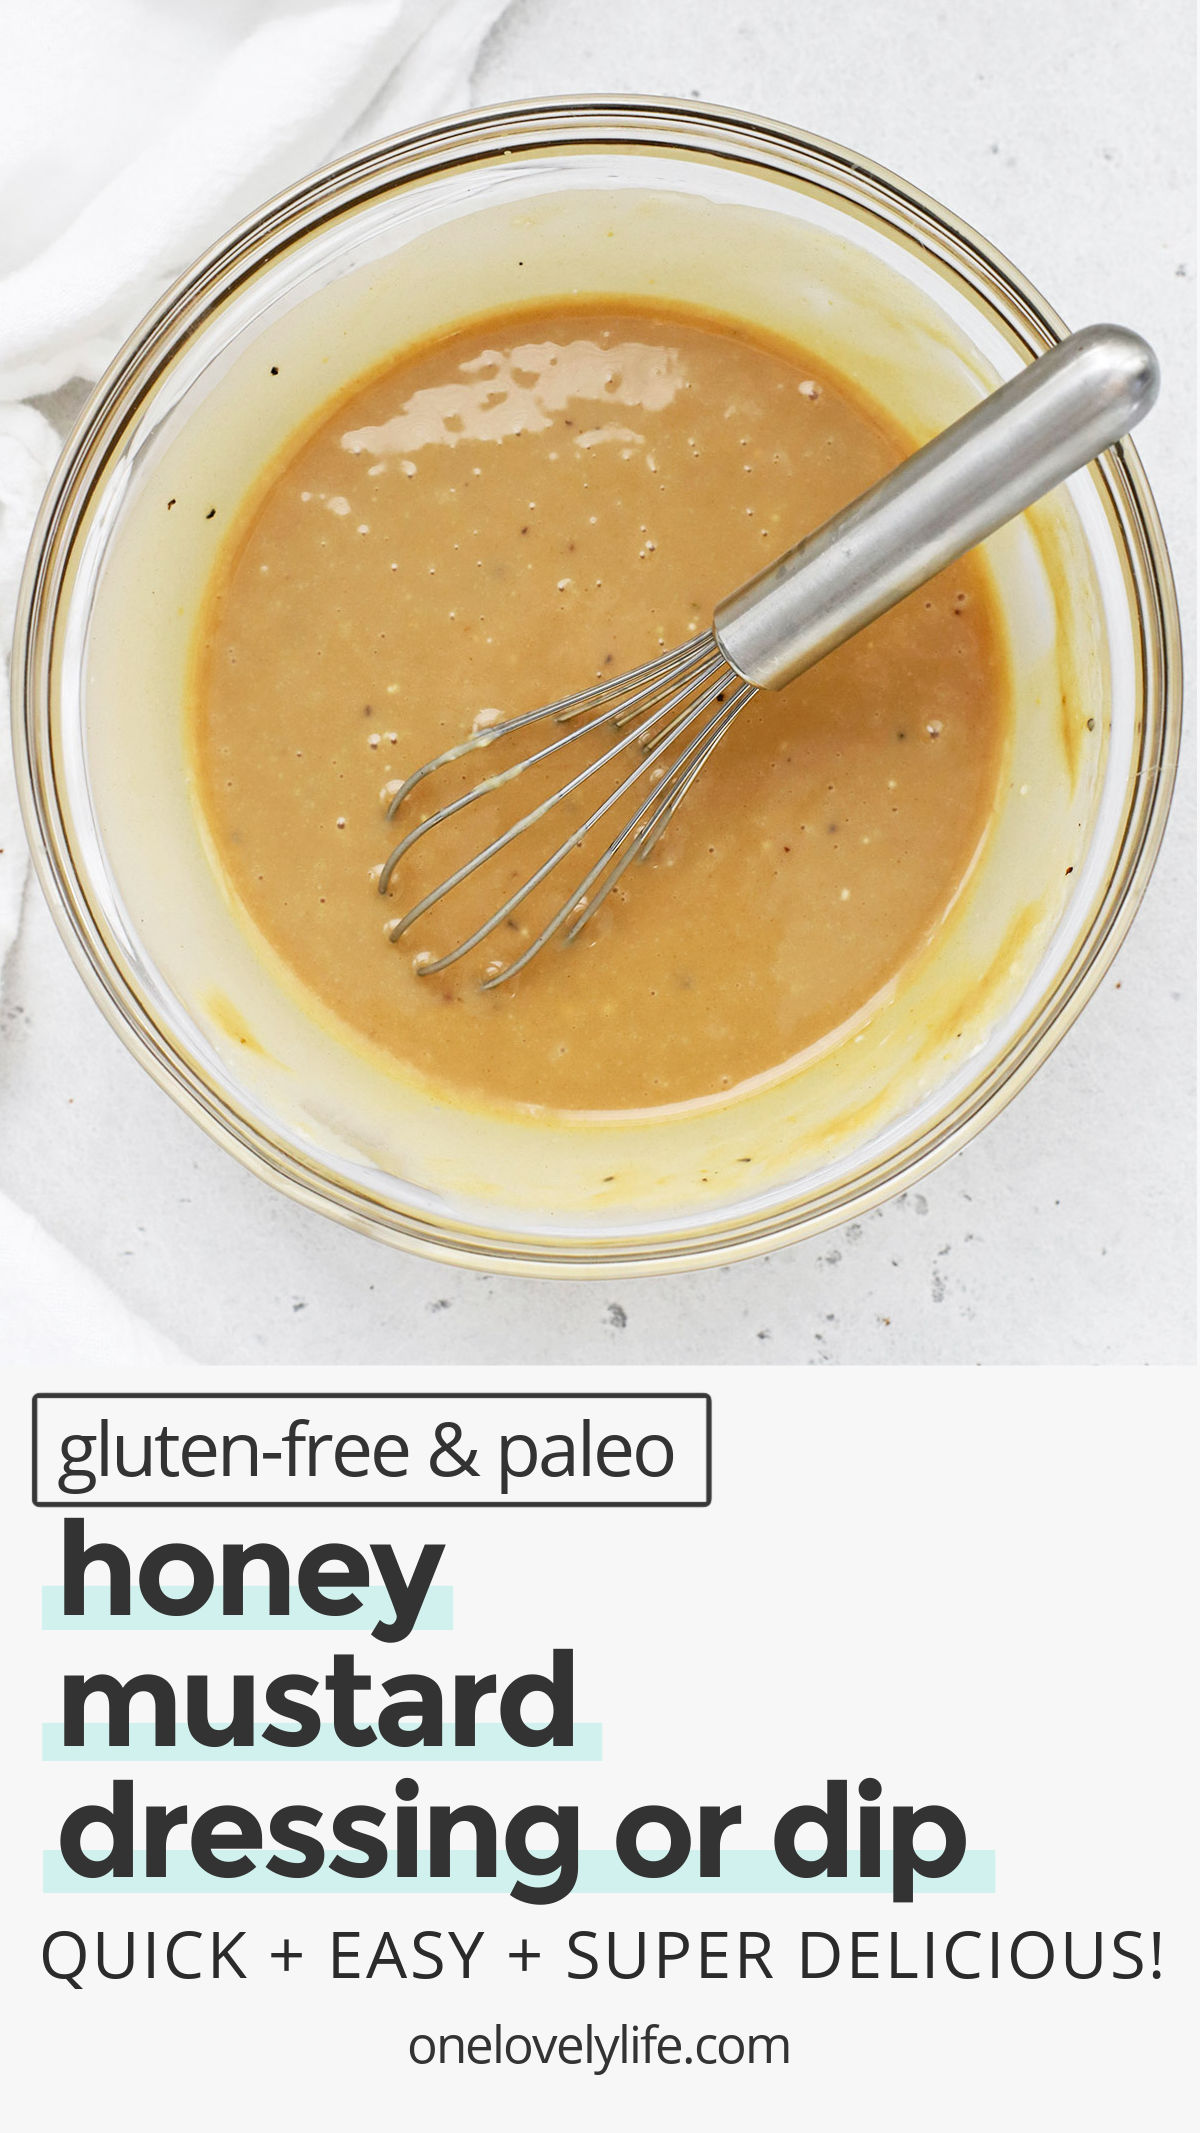 Honey Mustard Dressing - Add a tangy zip to your favorite salad, sandwich, or chicken with our homemade honey mustard dip or dressing! (Gluten-Free, Paleo-Friendly) // honey mustard dressing recipe // paleo honey mustard // easy honey mustard // honey mustard dipping sauce recipe // honey mustard dip recipe // vegan honey mustard // vegetarian honey mustard // the best honey mustard dressing // chicken dipping sauce // cobb salad dressing // honey mustard sauce